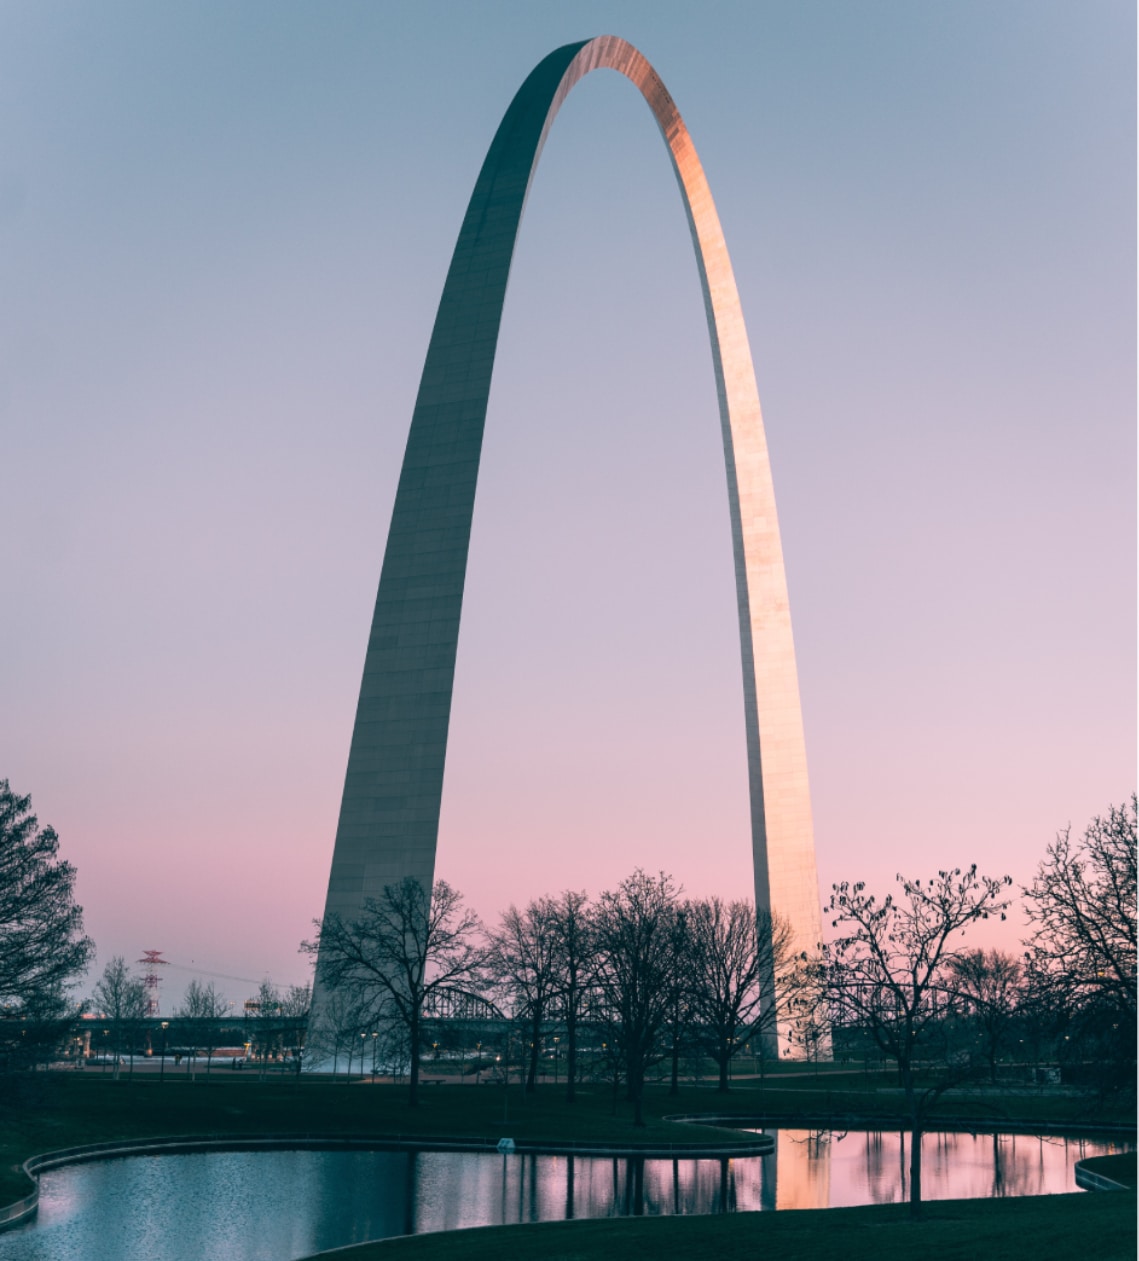 A little about St. Louis img